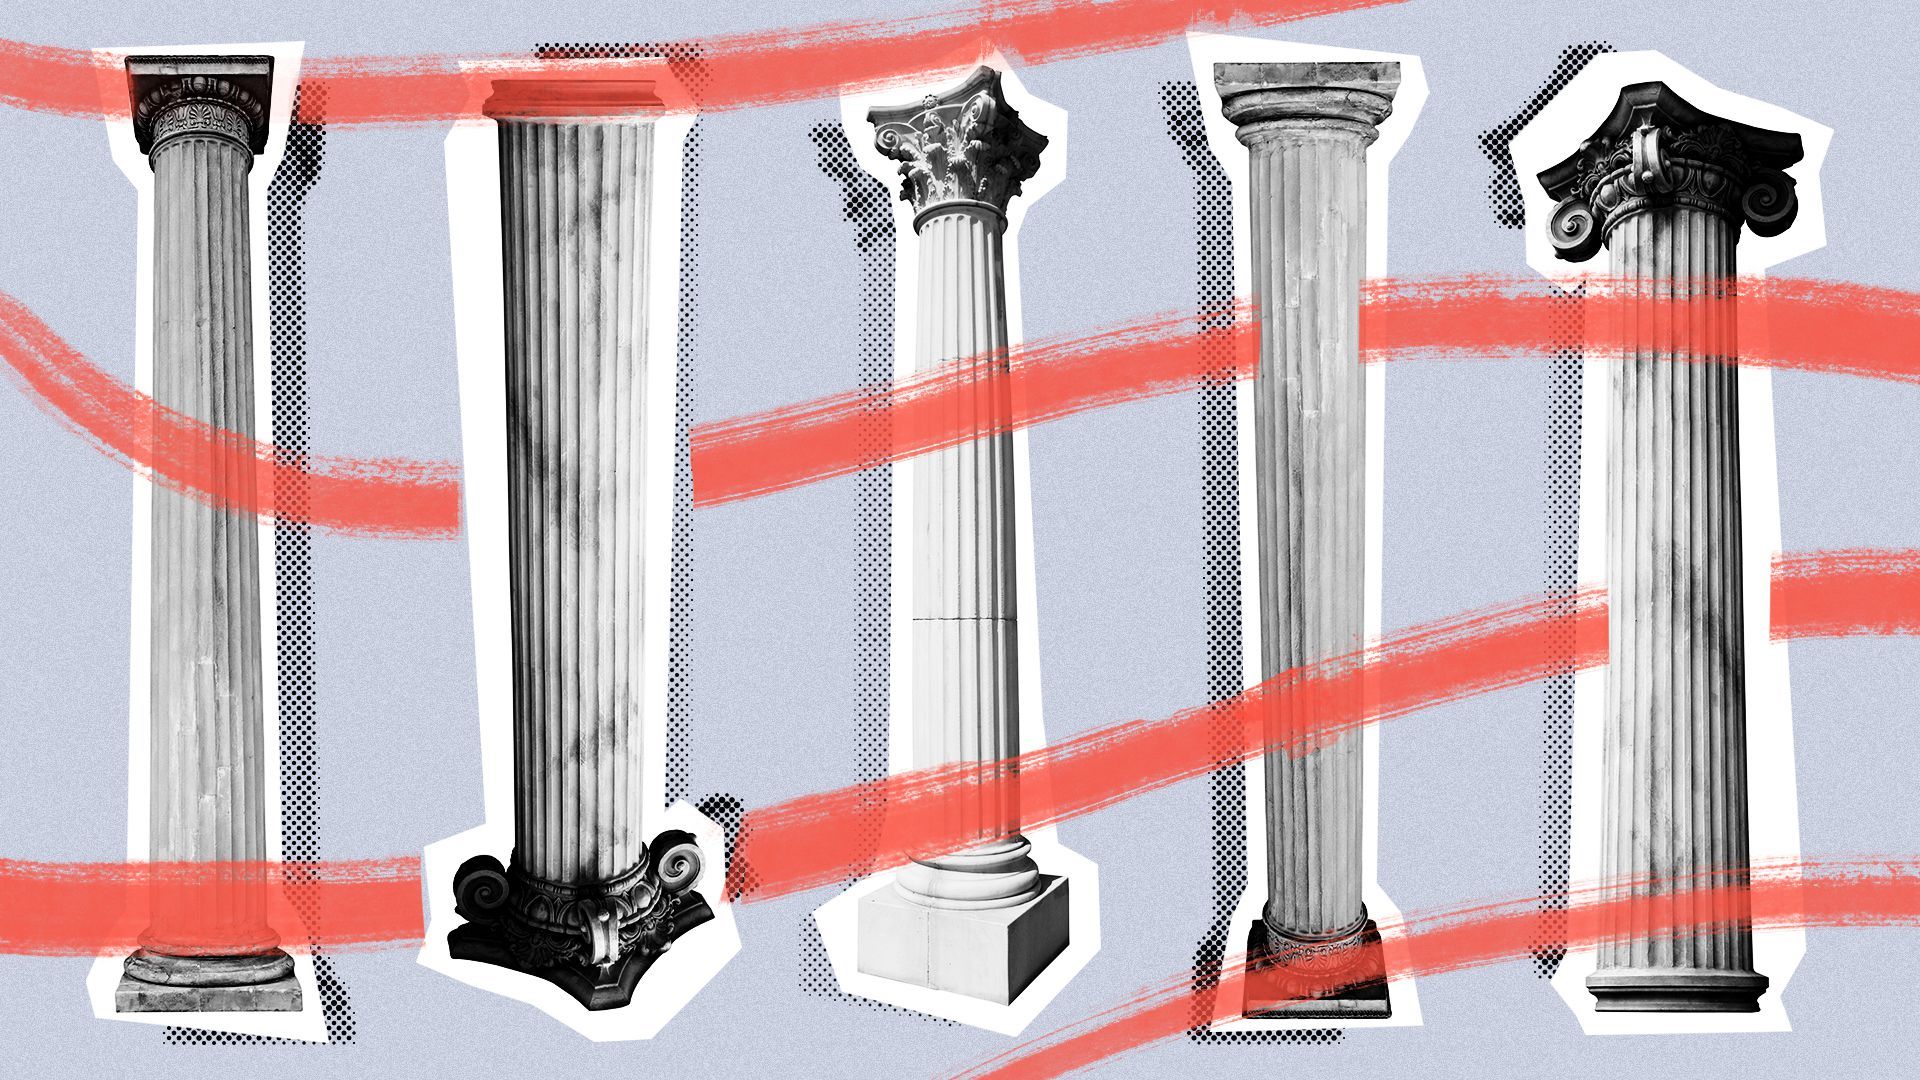 Illustration of a pattern of Greek columns, upside-down and right-side up.